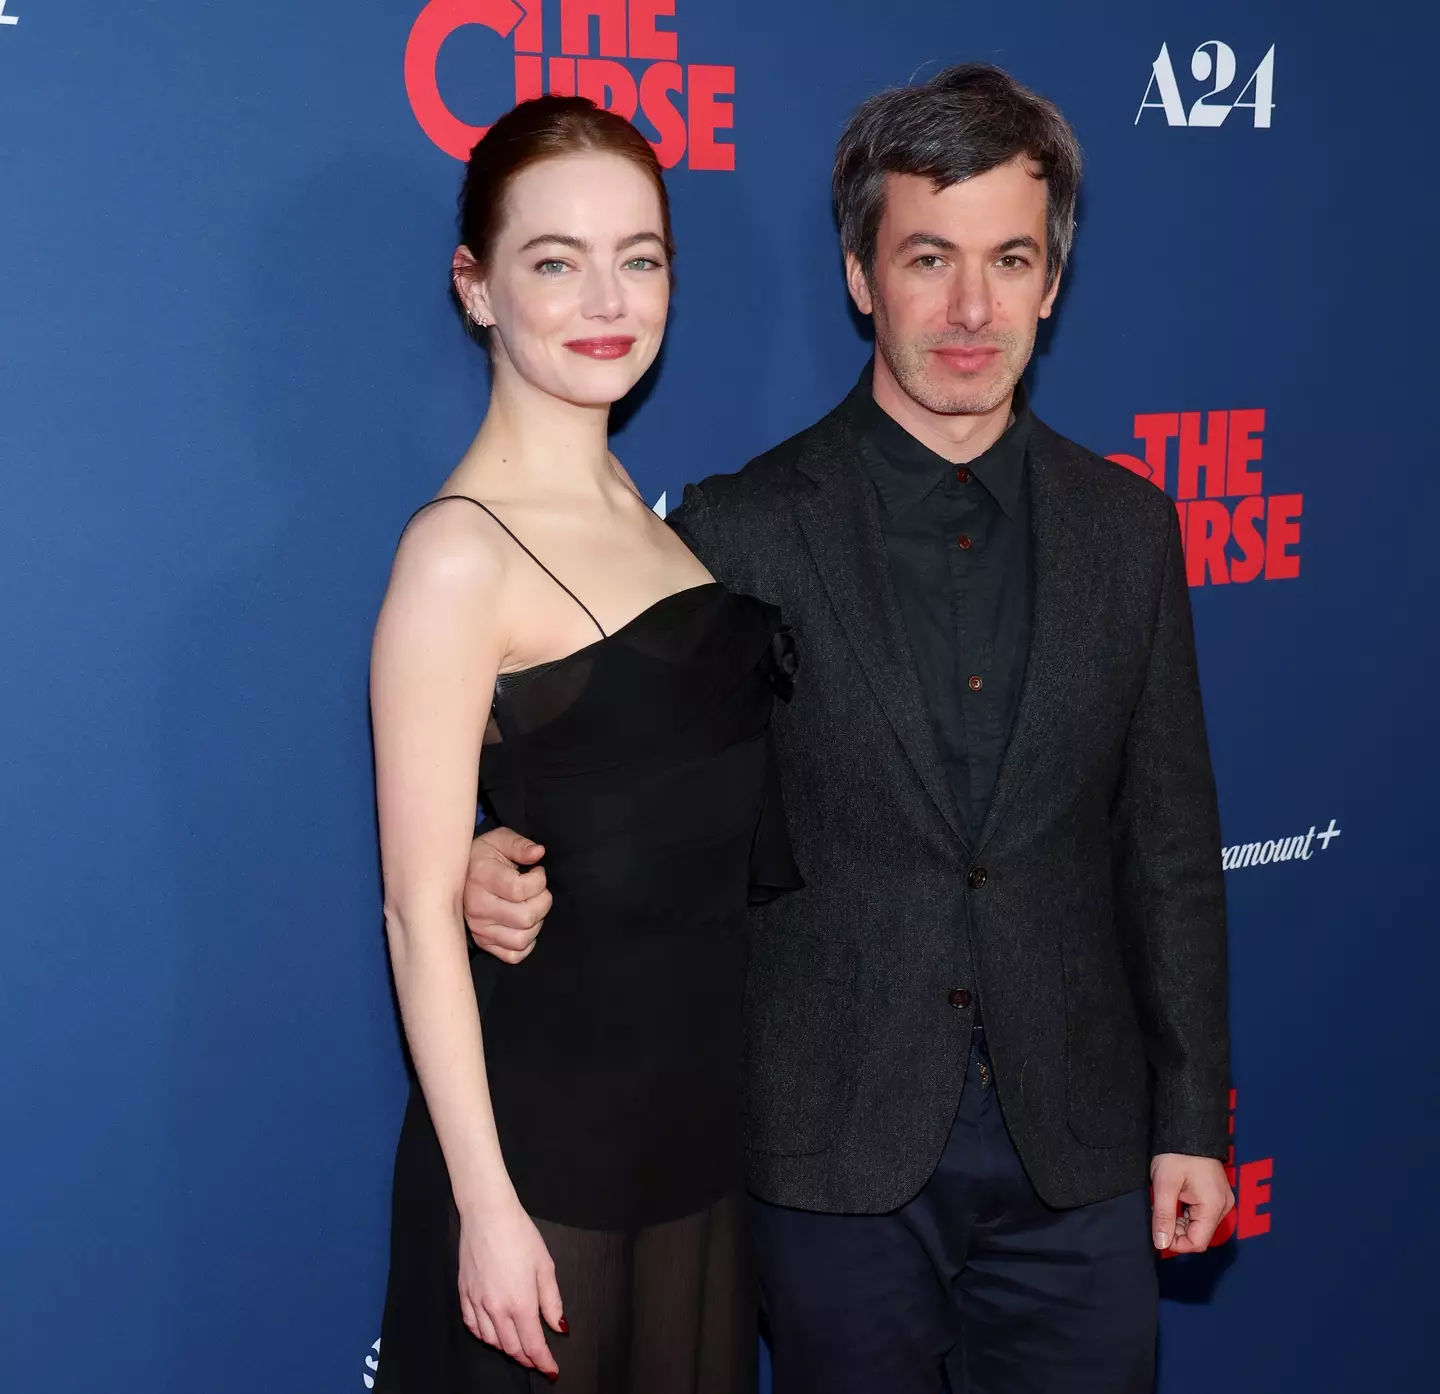  Emma Stone and Nathan Fielder are co-stars on The Curse. (Phillip Faraone/Getty Images)